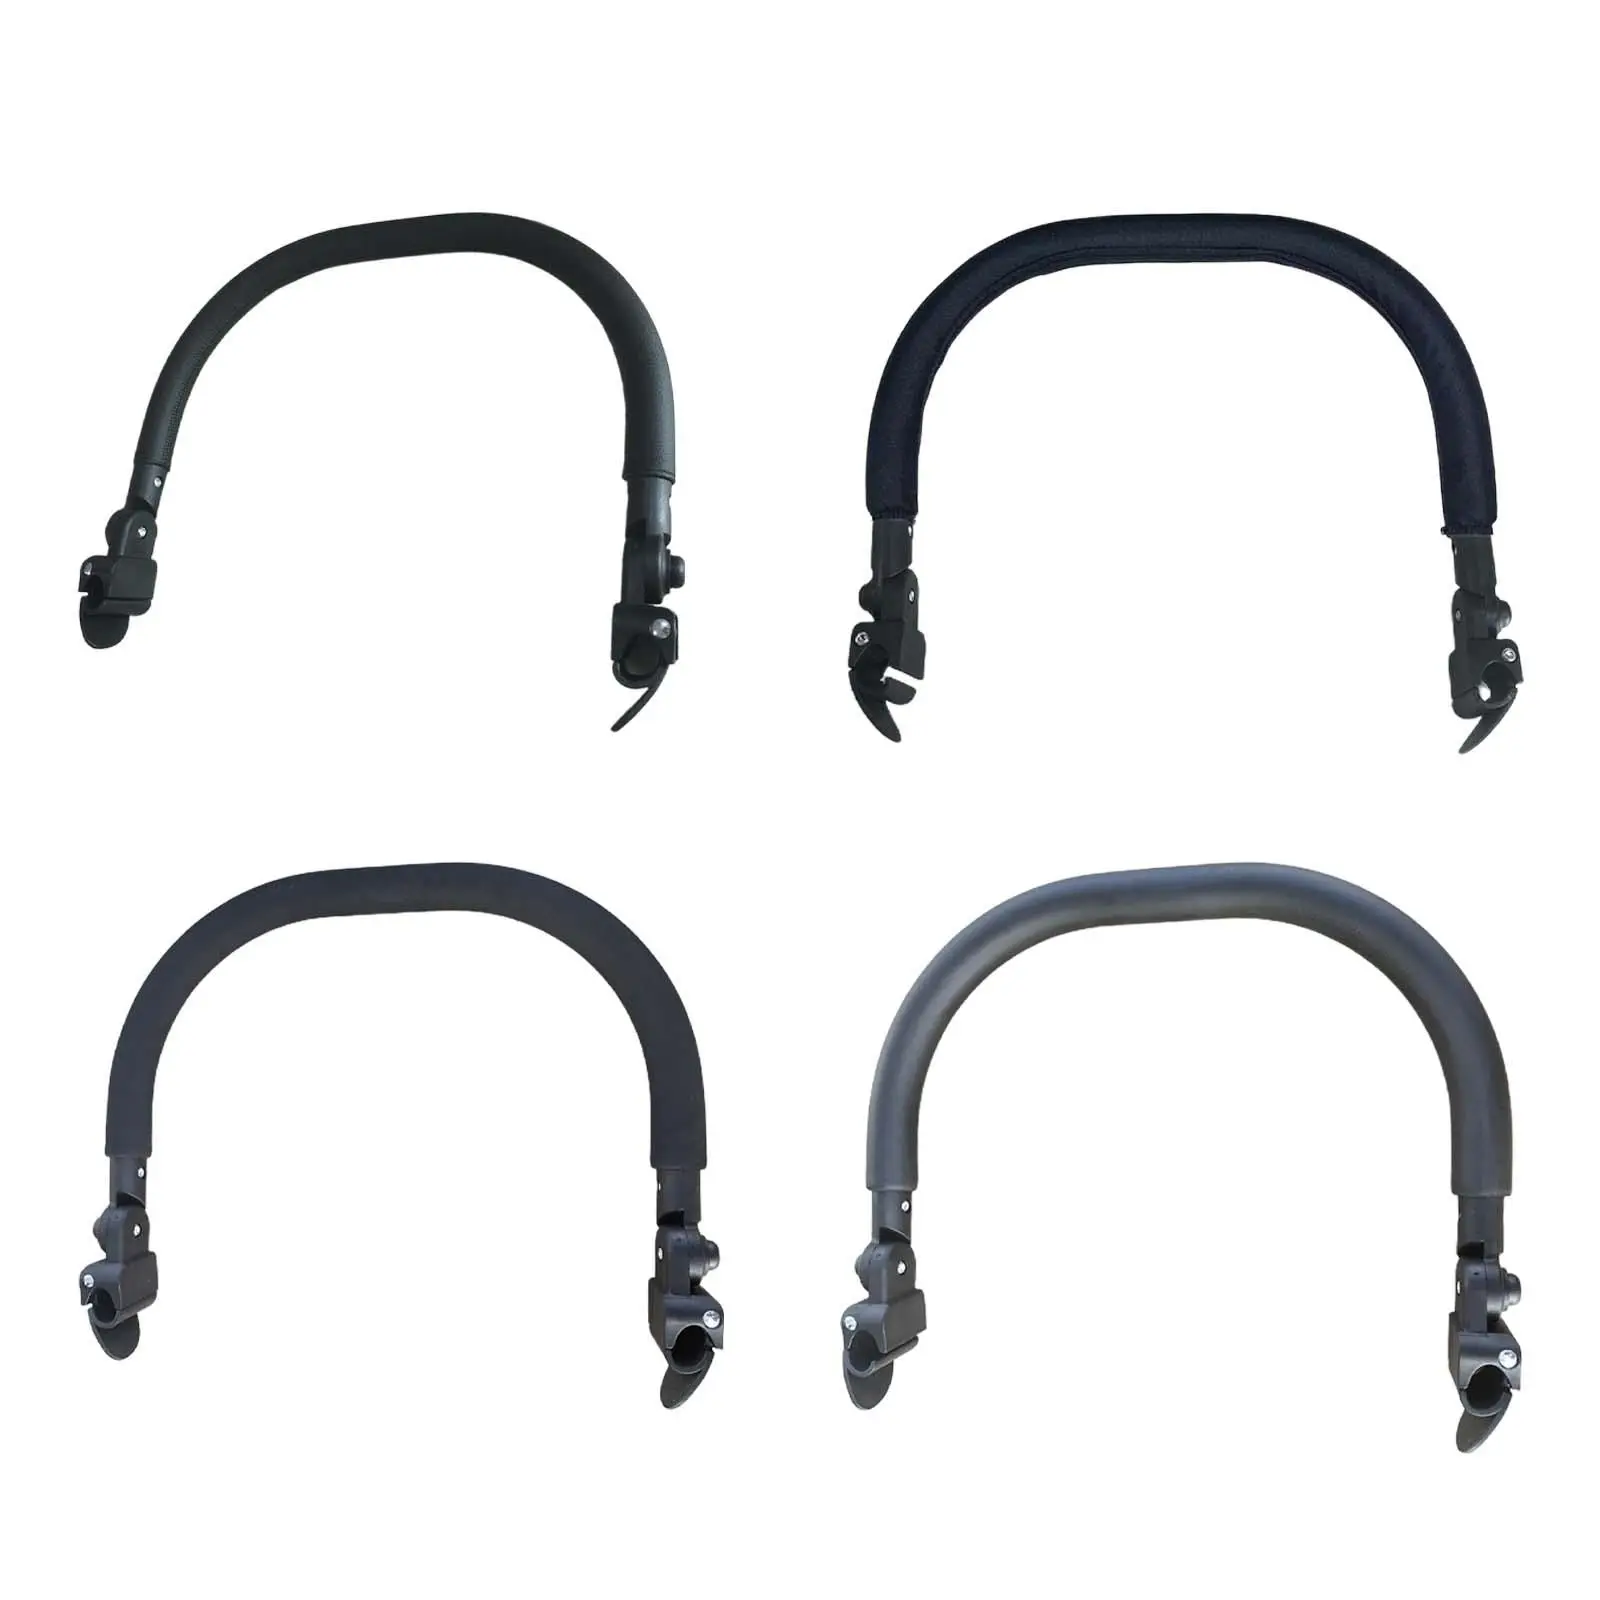 Baby Stroller Armrest Universal Handrail Protective Pushchair Front Bars for Pram Trolley Crossbar Baby Carriages Accessories